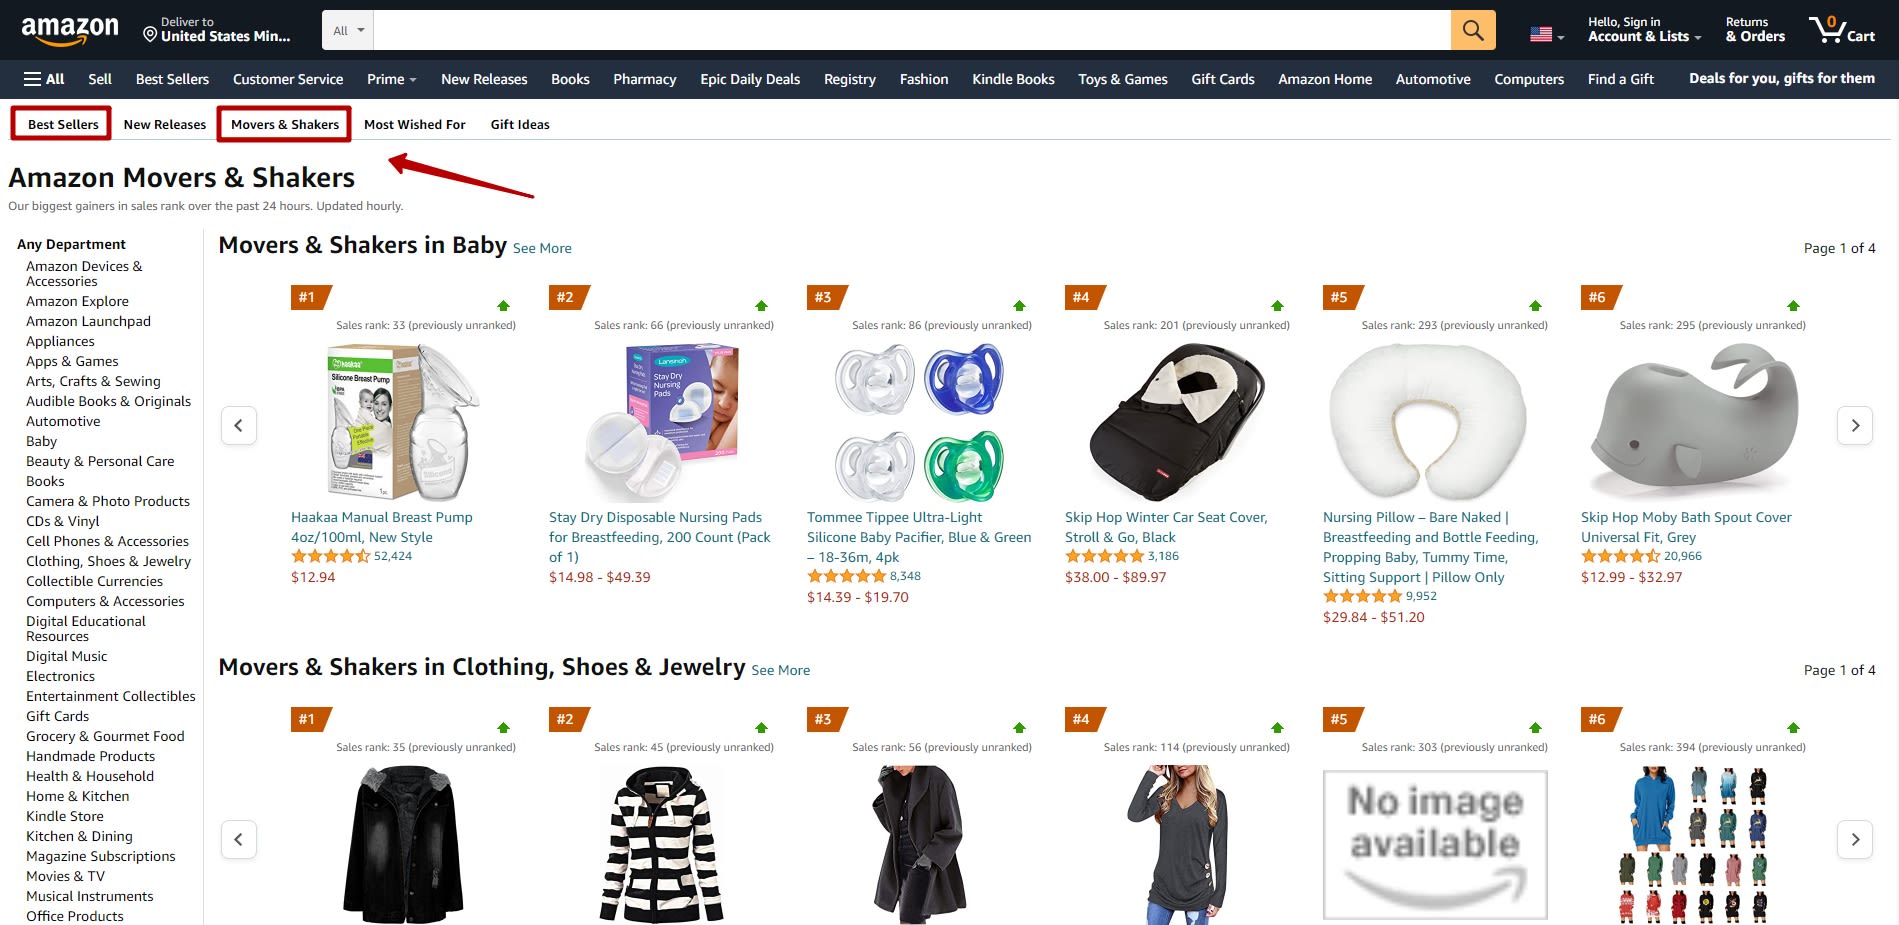 How to use Amazon to find private label products